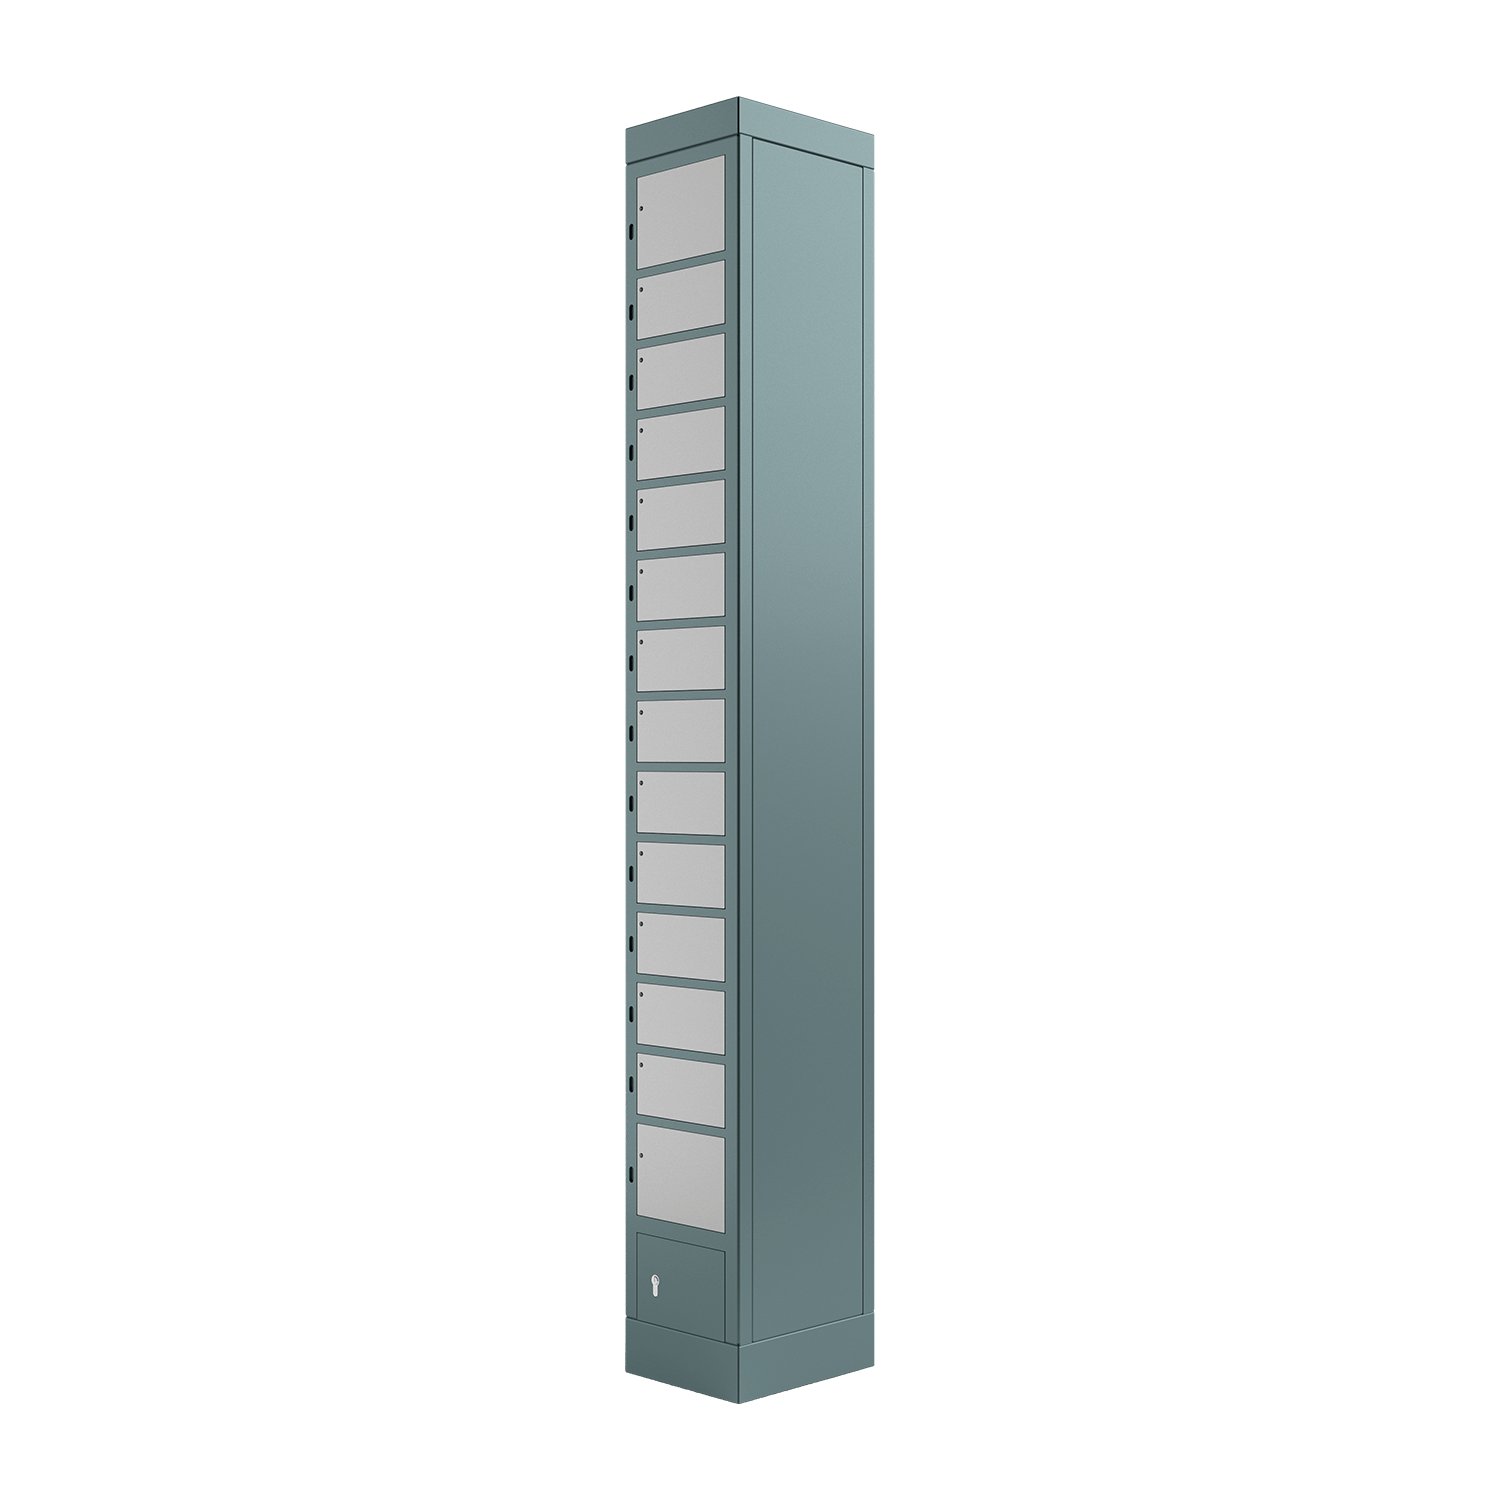 locker compartment system, size S, with 14 compartments, right view